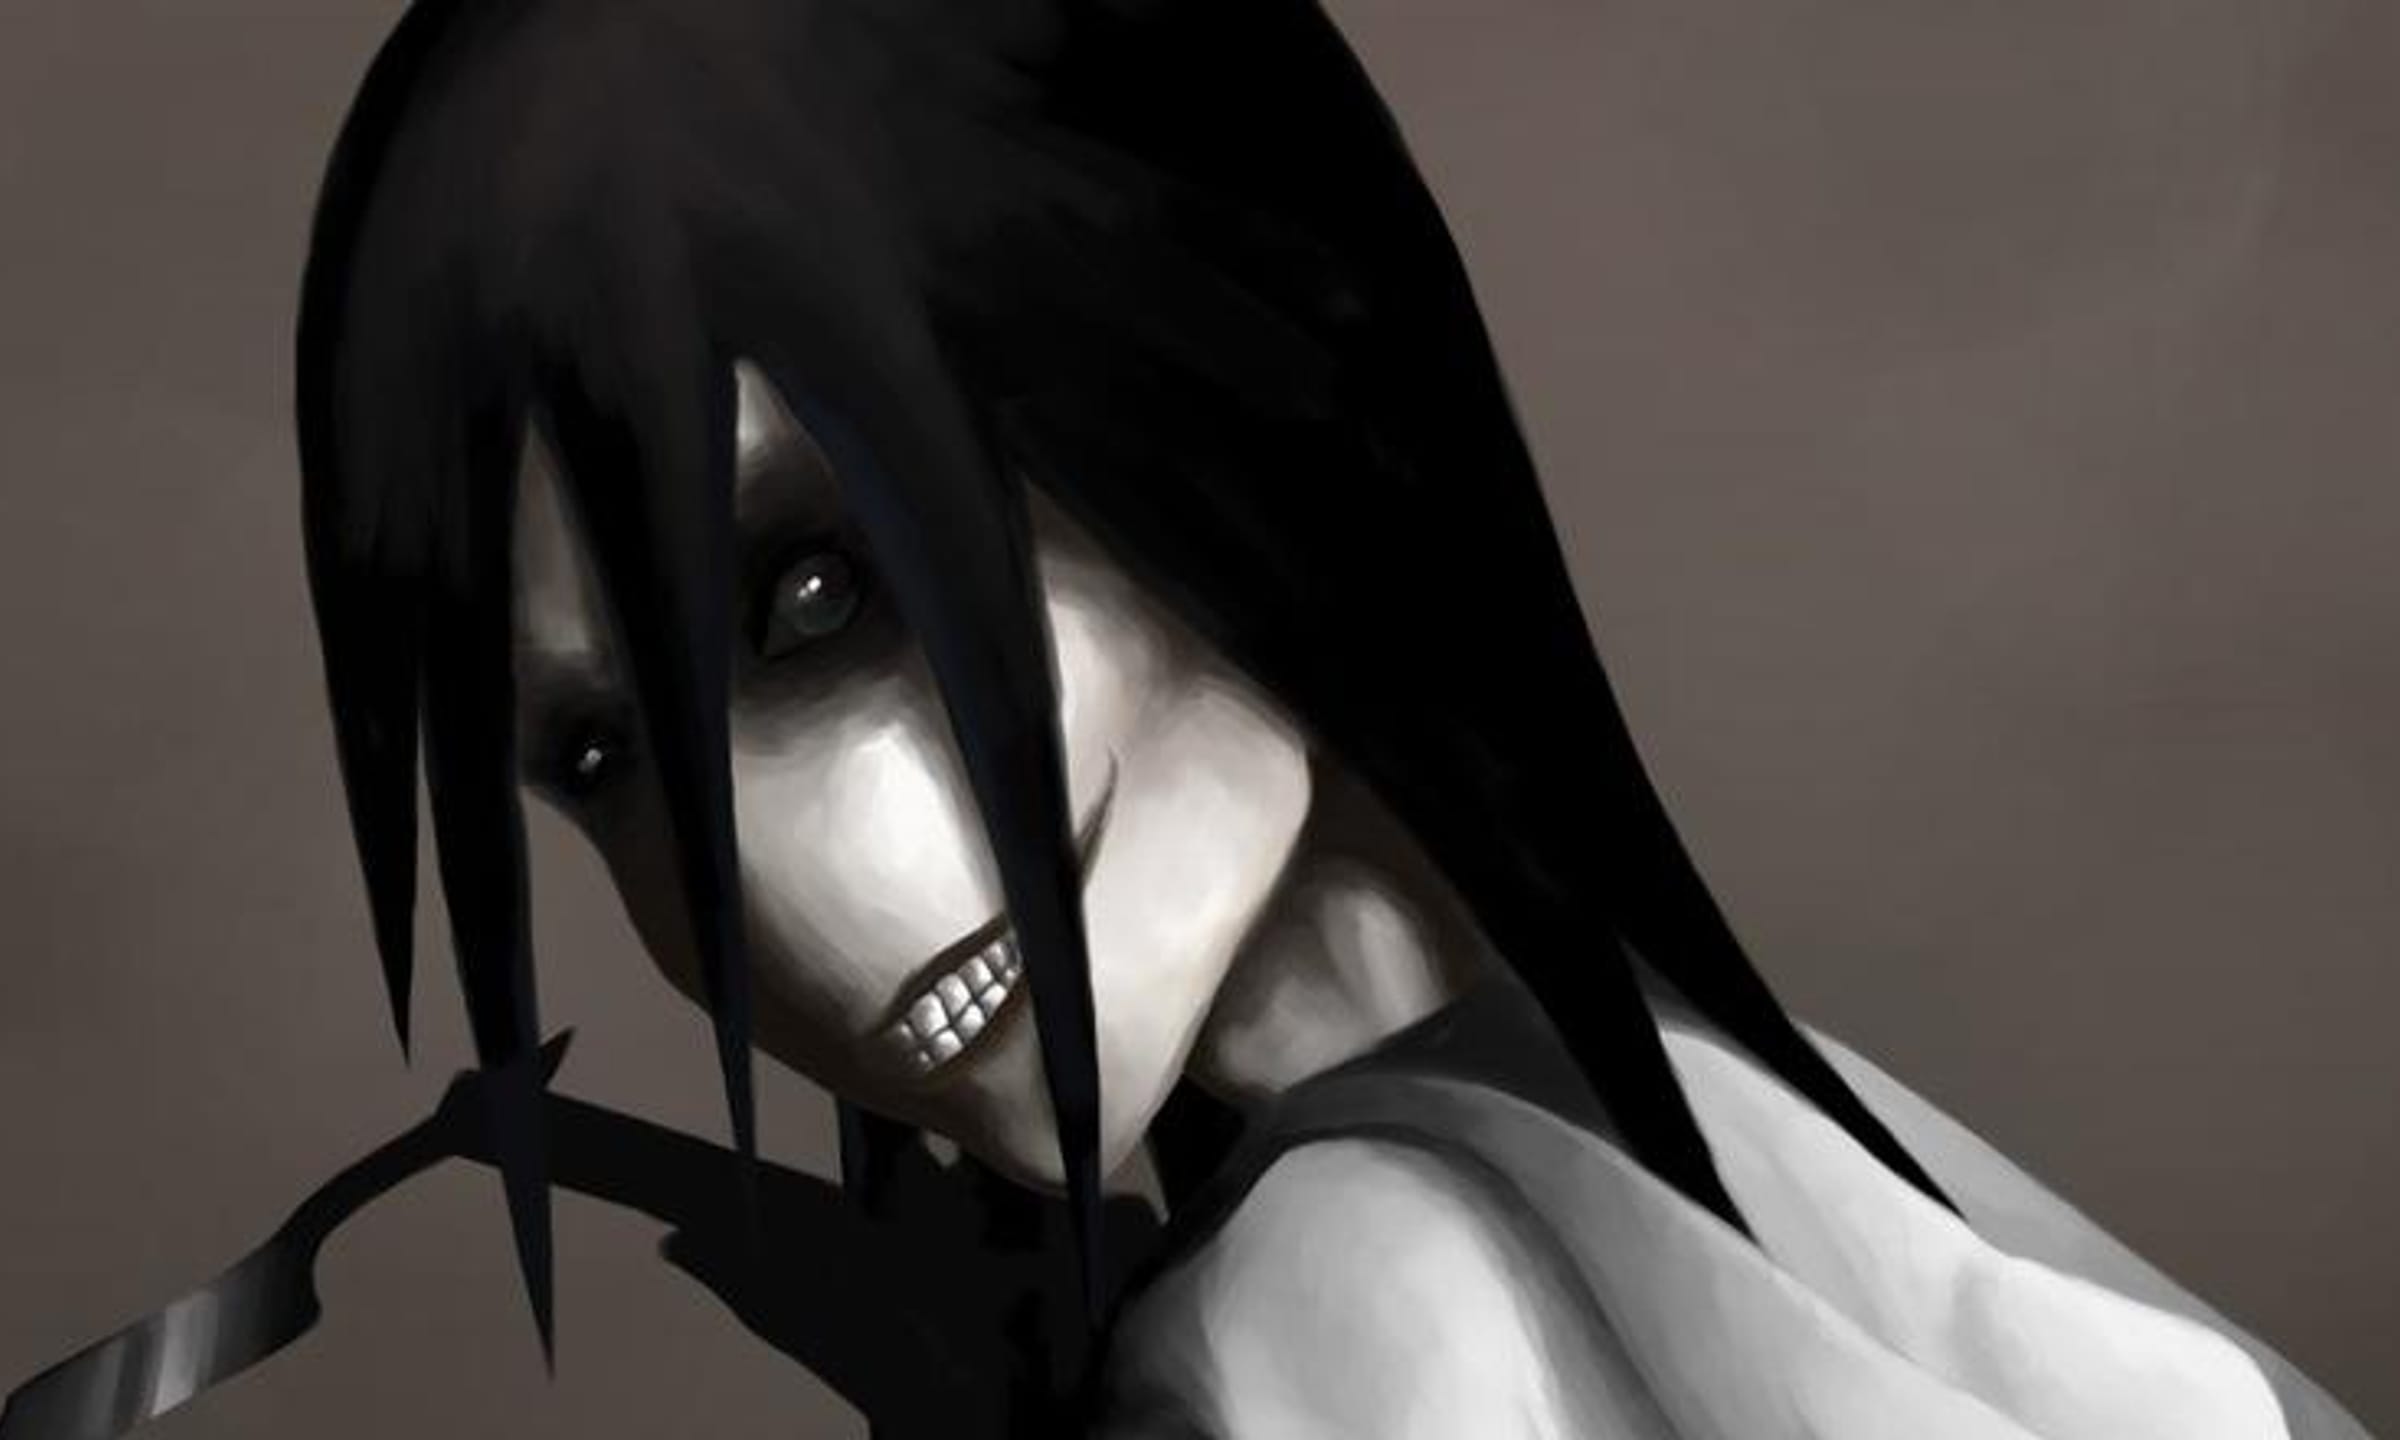 The Most Terrifying Jeff the Killer Creepypasta Stories Ever